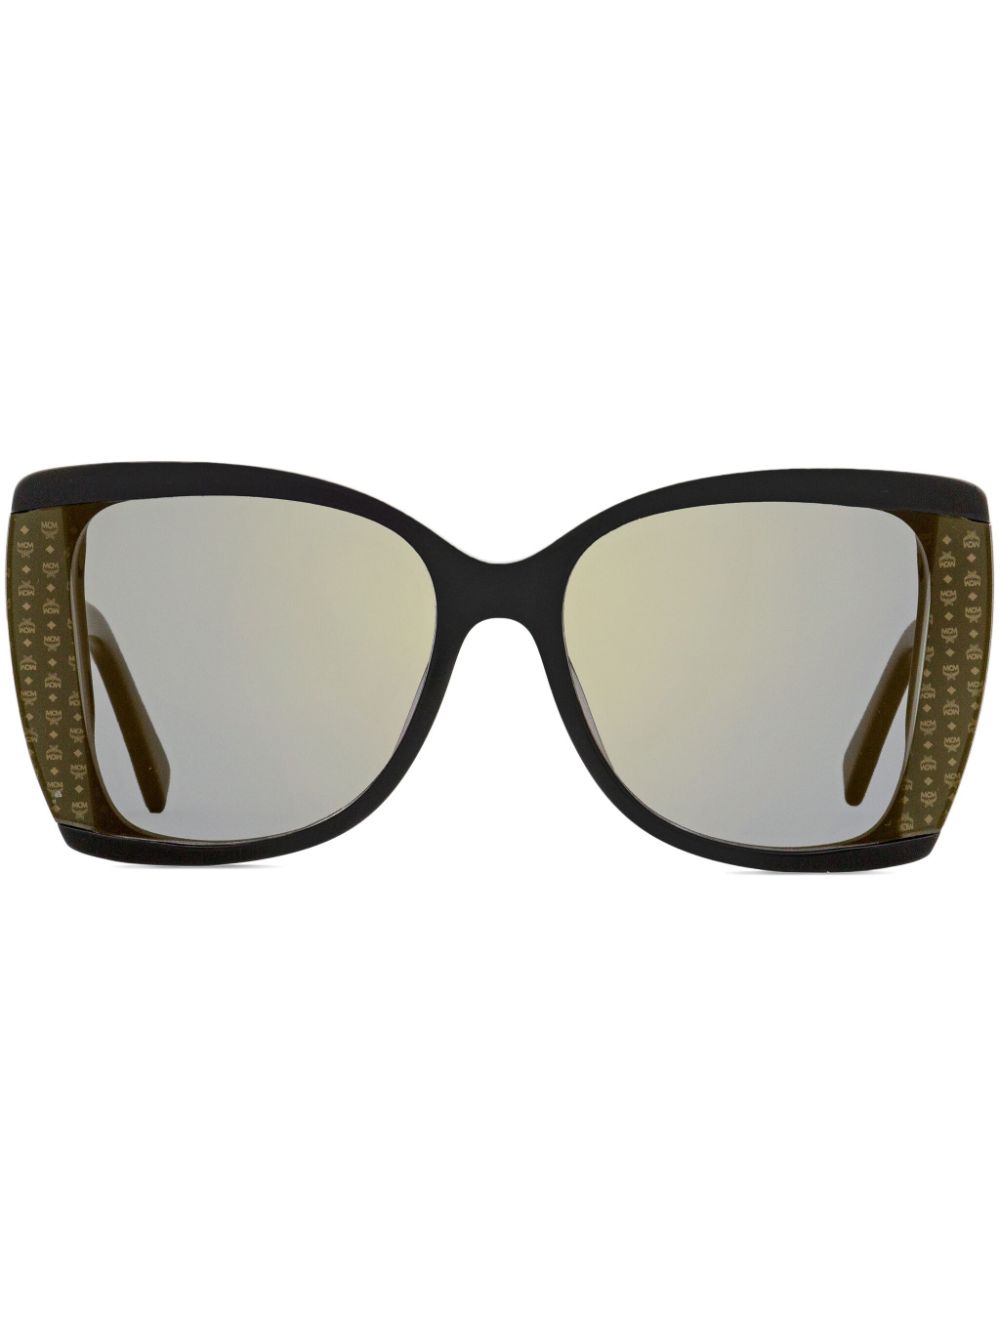 MCM 710 BUTTERFLY SUNGLASSES